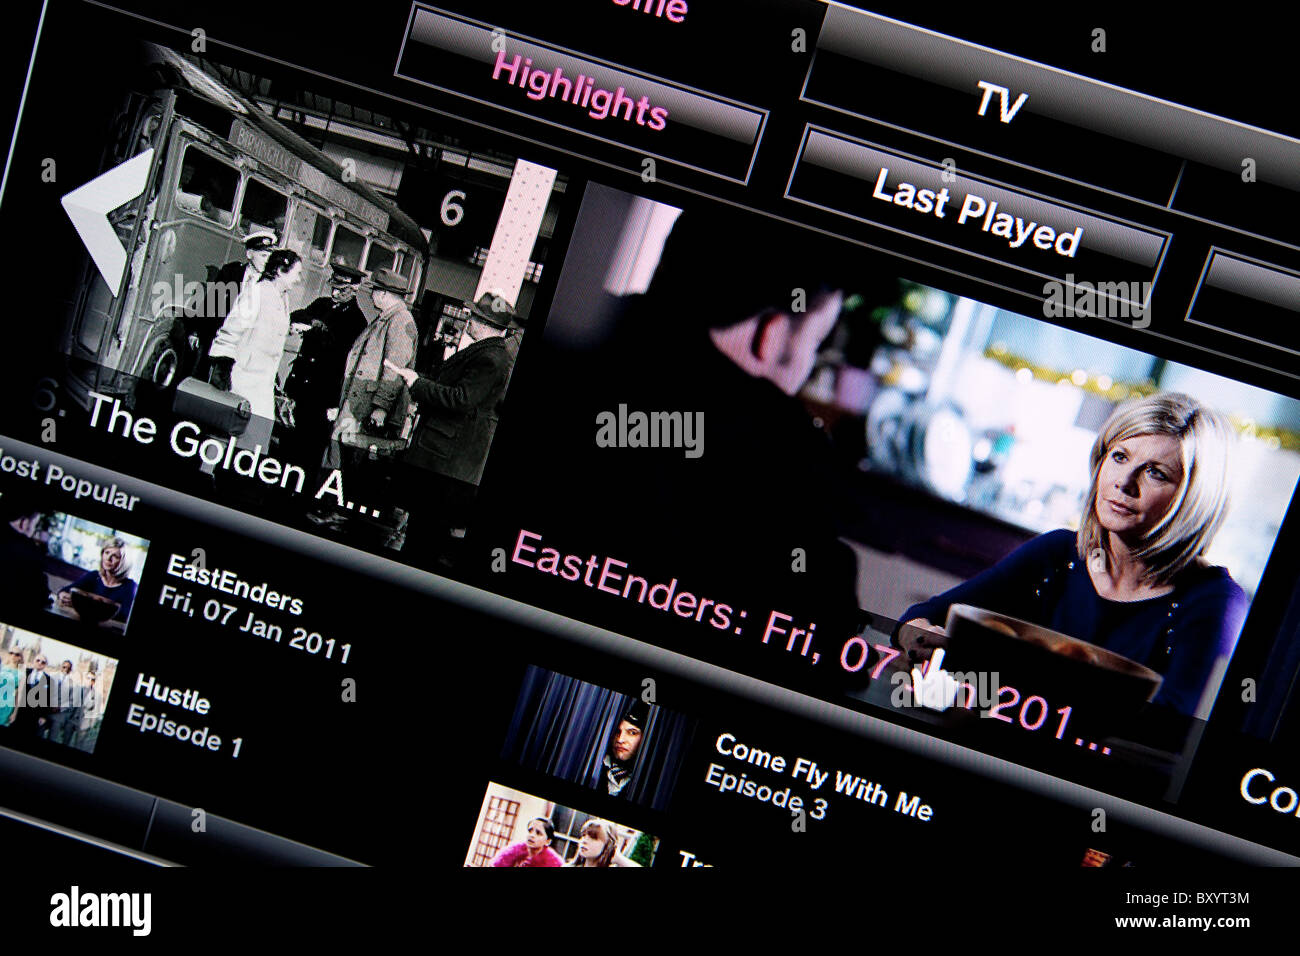 BBC iPlayer On Demand service as displayed on a HD High Definition LCD TV via a Sony Playstation 3 PS3 UK Stock Photo